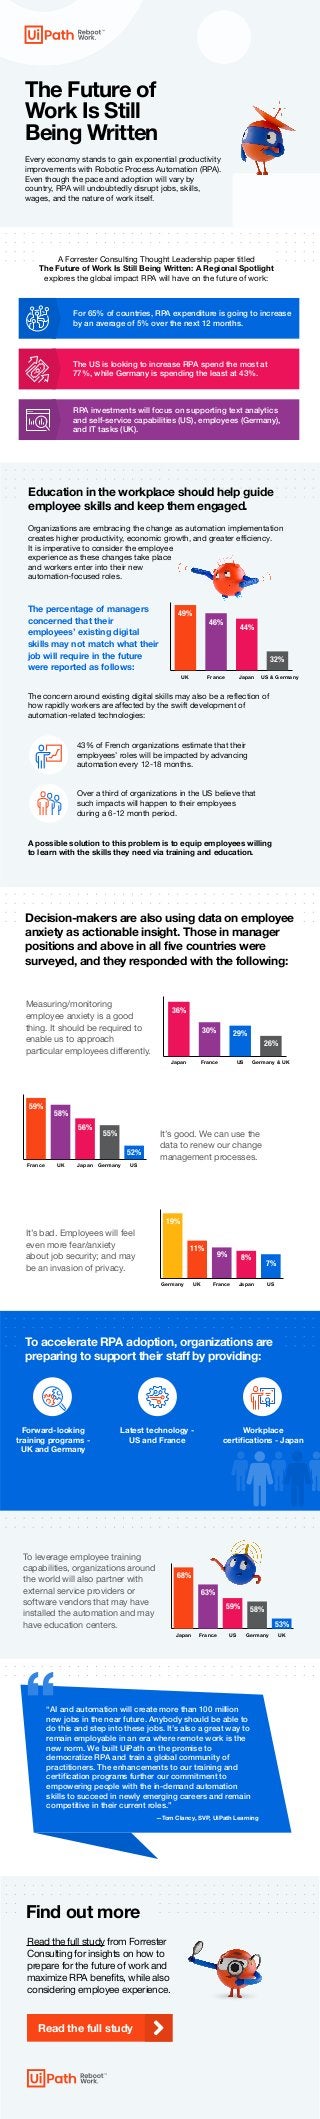 Decision-makers are also using data on employee
anxiety as actionable insight. Those in manager
positions and above in all ﬁve countries were
surveyed, and they responded with the following:
Find out more
Every economy stands to gain exponential productivity
improvements with Robotic Process Automation (RPA).
Even though the pace and adoption will vary by
country, RPA will undoubtedly disrupt jobs, skills,
wages, and the nature of work itself.
The Future of
Work Is Still
Being Written 
Read the full study from Forrester
Consulting for insights on how to
prepare for the future of work and
maximize RPA beneﬁts, while also
considering employee experience.
43% of French organizations estimate that their
employees’ roles will be impacted by advancing
automation every 12-18 months.
“AI and automation will create more than 100 million
new jobs in the near future. Anybody should be able to
do this and step into these jobs. It’s also a great way to
remain employable in an era where remote work is the
new norm. We built UiPath on the promise to
democratize RPA and train a global community of
practitioners. The enhancements to our training and
certiﬁcation programs further our commitment to
empowering people with the in-demand automation
skills to succeed in newly emerging careers and remain
competitive in their current roles.”
—Tom Clancy, SVP, UiPath Learning
Over a third of organizations in the US believe that
such impacts will happen to their employees
during a 6-12 month period.
For 65% of countries, RPA expenditure is going to increase
by an average of 5% over the next 12 months.
The US is looking to increase RPA spend the most at
77%, while Germany is spending the least at 43%.
RPA investments will focus on supporting text analytics
and self-service capabilities (US), employees (Germany),
and IT tasks (UK).
US & GermanyJapanFranceUK
49%
46%
44%
32%
Germany & UKUSFranceJapan
36%
30% 29%
26%
USGermanyJapanUKFrance
59%
58%
56%
55%
52%
UKGermanyUSFranceJapan
68%
63%
59% 58%
53%
USJapanFranceUKGermany
19%
11%
9% 8%
7%
A Forrester Consulting Thought Leadership paper titled
The Future of Work Is Still Being Written: A Regional Spotlight
explores the global impact RPA will have on the future of work:
The concern around existing digital skills may also be a reﬂection of
how rapidly workers are affected by the swift development of
automation-related technologies:
A possible solution to this problem is to equip employees willing
to learn with the skills they need via training and education.
Organizations are embracing the change as automation implementation
creates higher productivity, economic growth, and greater efﬁciency.
It is imperative to consider the employee
experience as these changes take place
and workers enter into their new
automation-focused roles.
The percentage of managers
concerned that their
employees’ existing digital
skills may not match what their
job will require in the future
were reported as follows:
It’s bad. Employees will feel
even more fear/anxiety
about job security; and may
be an invasion of privacy.
To leverage employee training
capabilities, organizations around
the world will also partner with
external service providers or
software vendors that may have
installed the automation and may
have education centers.
Measuring/monitoring
employee anxiety is a good
thing. It should be required to
enable us to approach
particular employees differently.
It’s good. We can use the
data to renew our change
management processes.
Forward-looking
training programs -
UK and Germany
Latest technology -
US and France
To accelerate RPA adoption, organizations are
preparing to support their staff by providing:
Workplace
certiﬁcations - Japan
Read the full study
Education in the workplace should help guide
employee skills and keep them engaged.
 